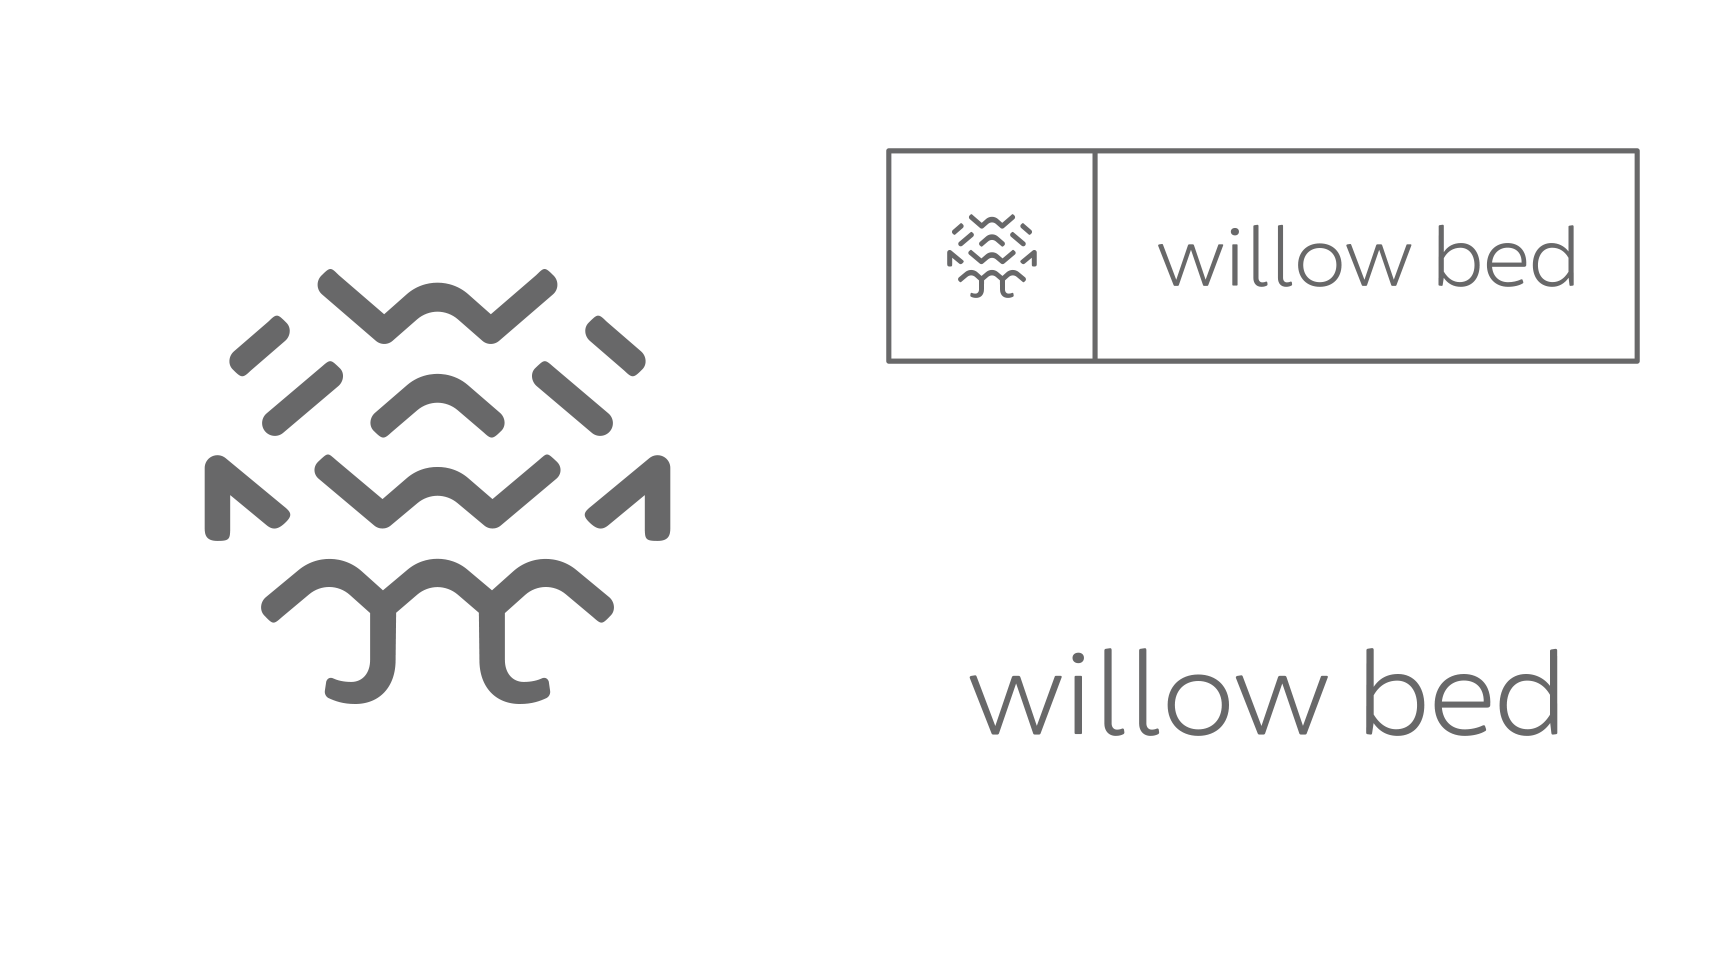 Logos designed for Willow Bed including willow tree icon, tag lockup and wordmark